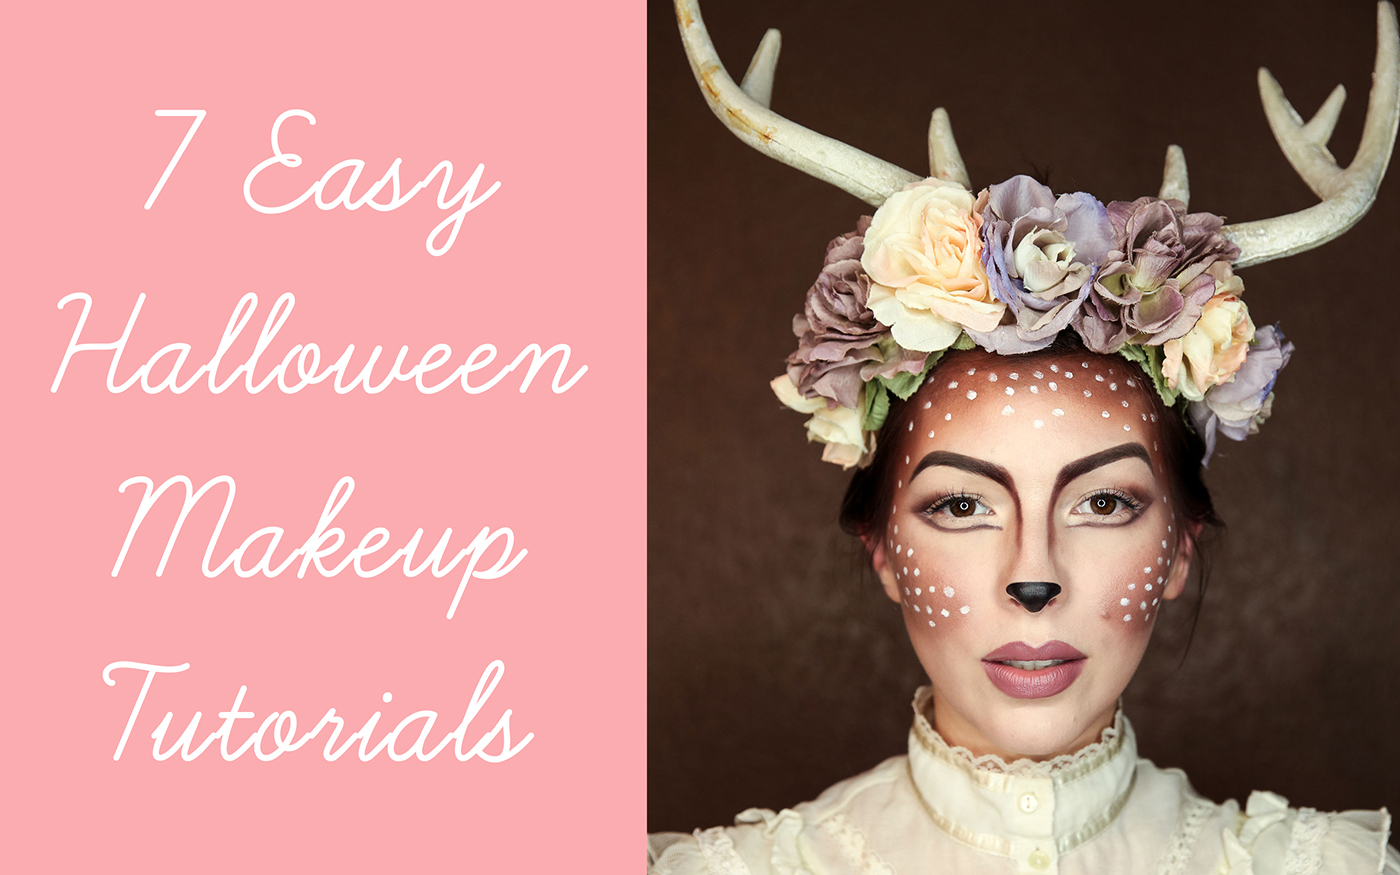 7 Easy Halloween Makeup Tutorials You Should Try For This Year's Costume